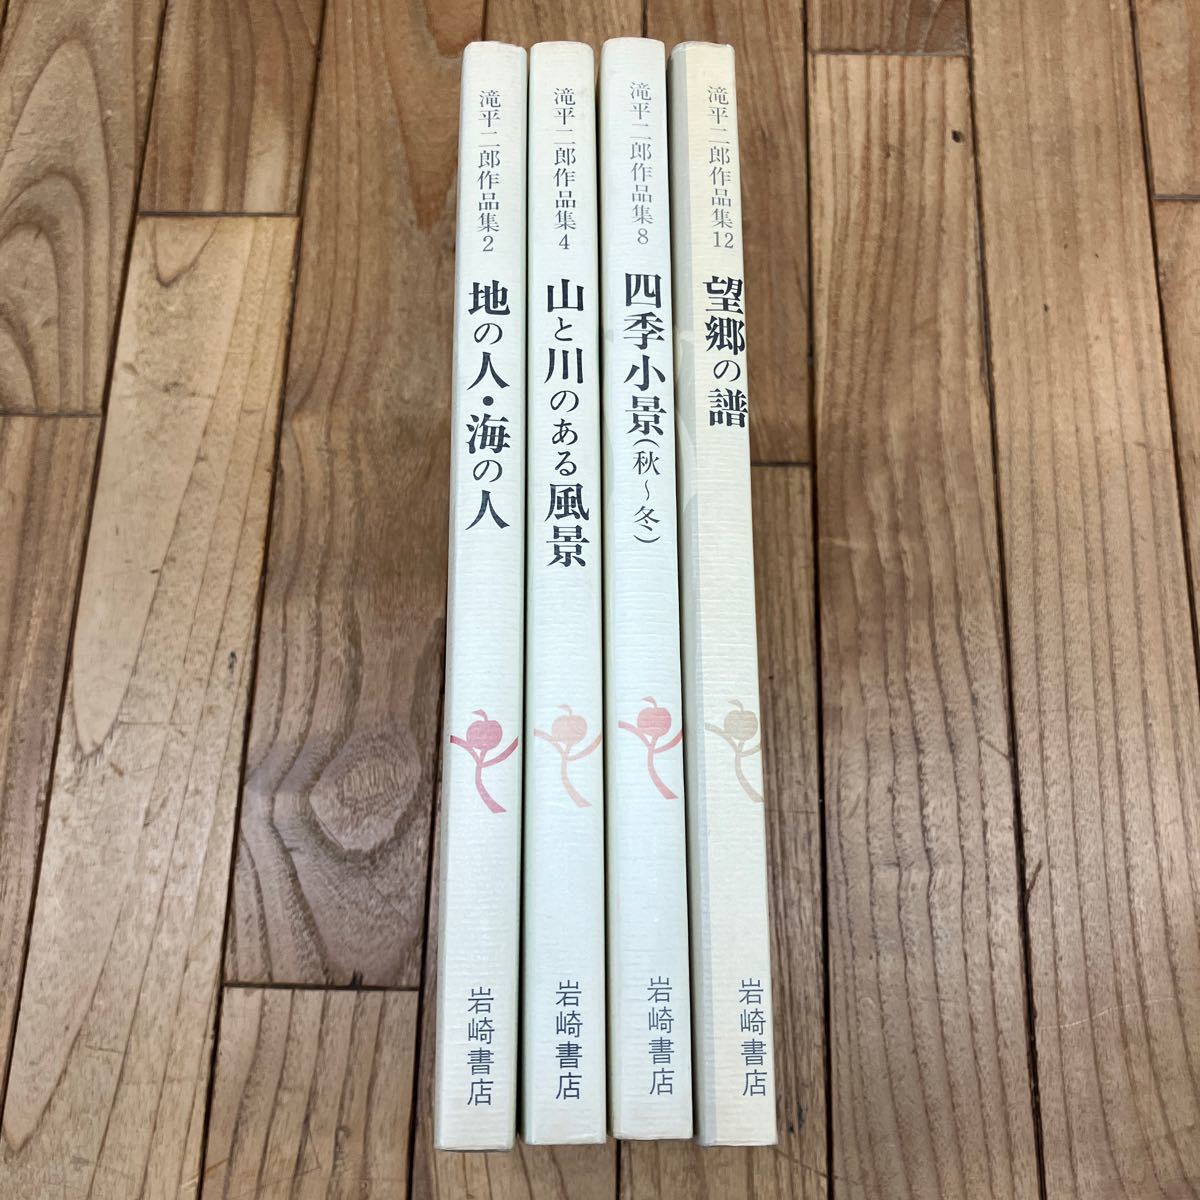 S-ш/ Collection of works by Jiro Takihira, set of 4 mismatched volumes, Iwasaki Shoten, People of the Earth and the Sea, Landscapes with Mountains and Rivers, Small Scenes of the Four Seasons (Autumn to Winter), Music of Nostalgia, Painting, Art Book, Collection, Art Book